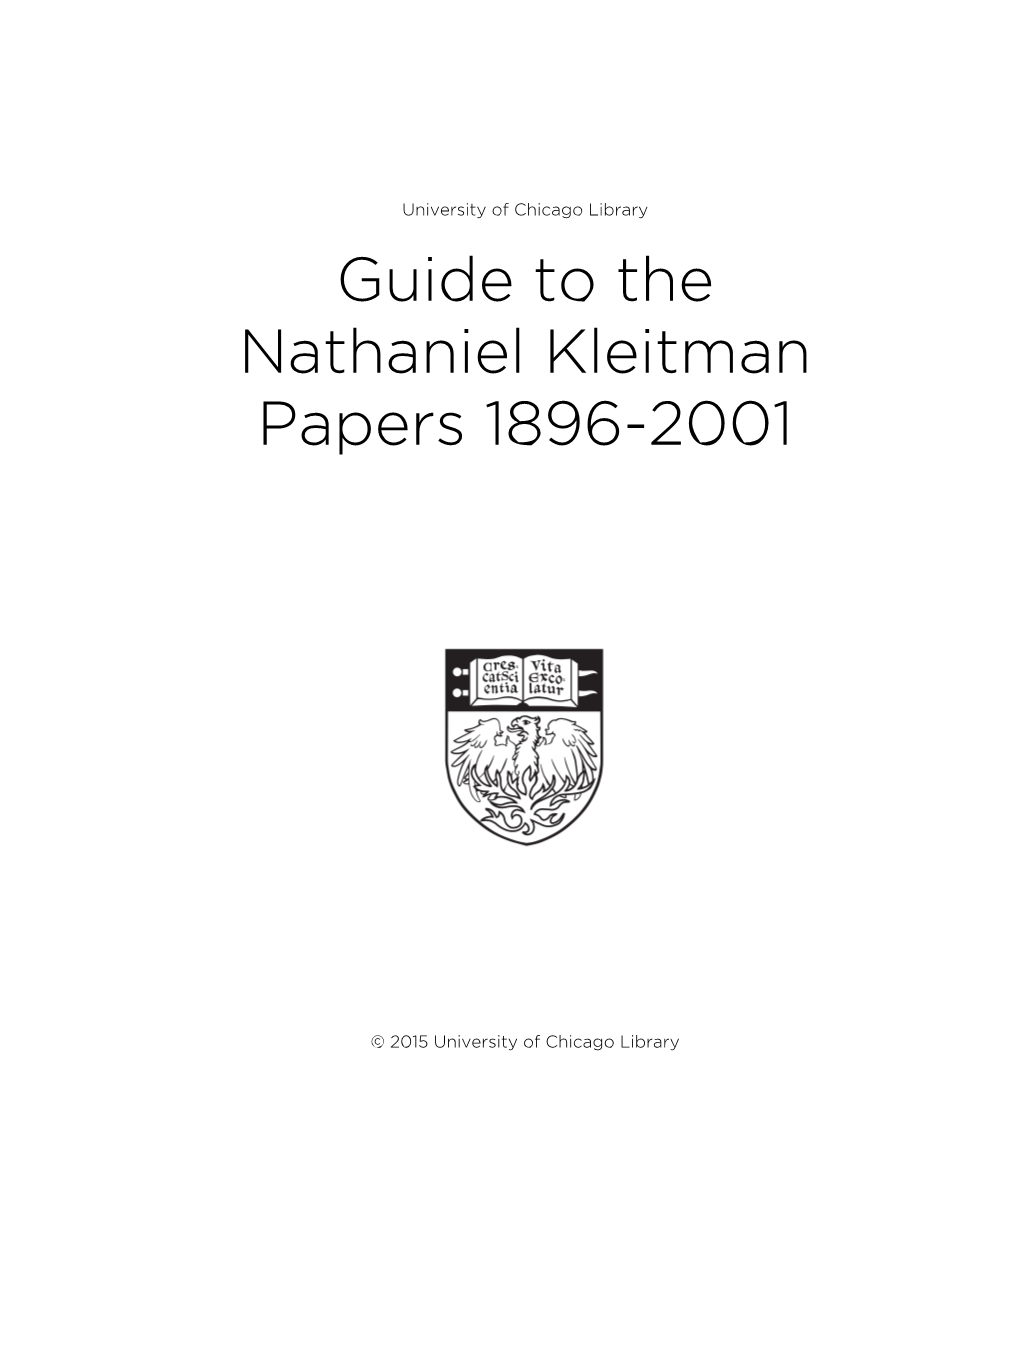 Guide to the Nathaniel Kleitman Papers 1896-2001